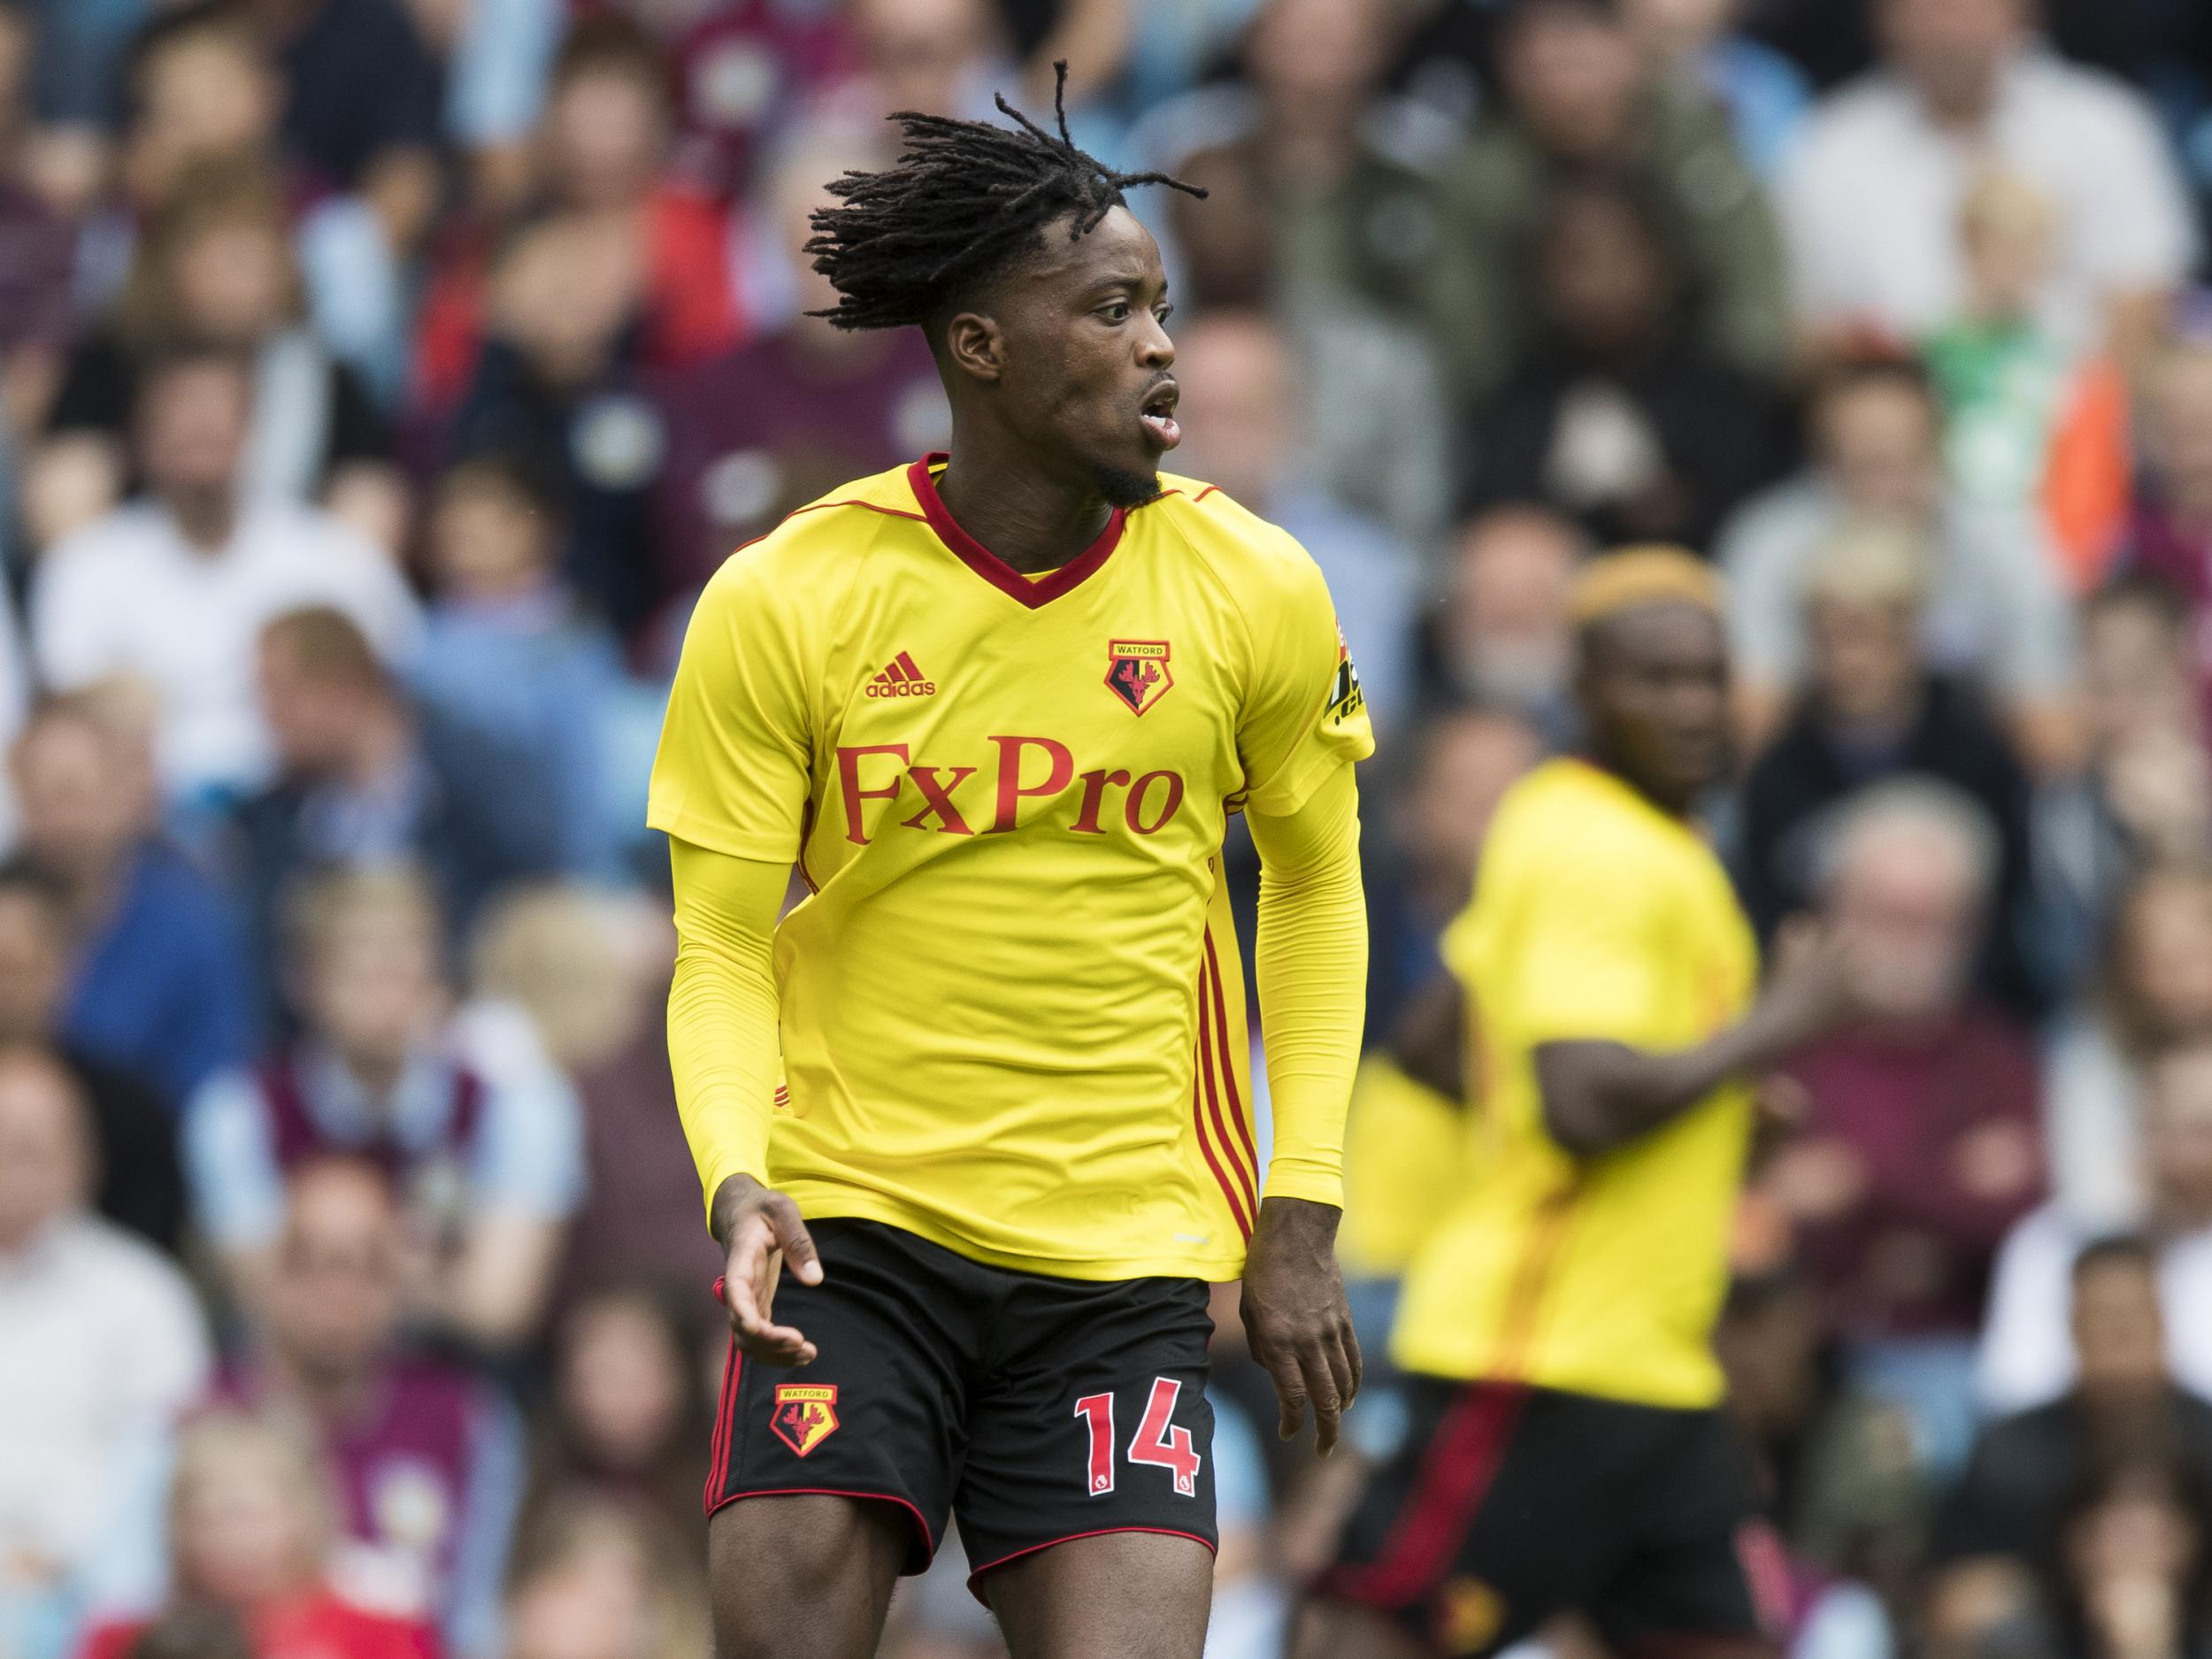 Chalobah's move to Watford has helped him earn full England honours